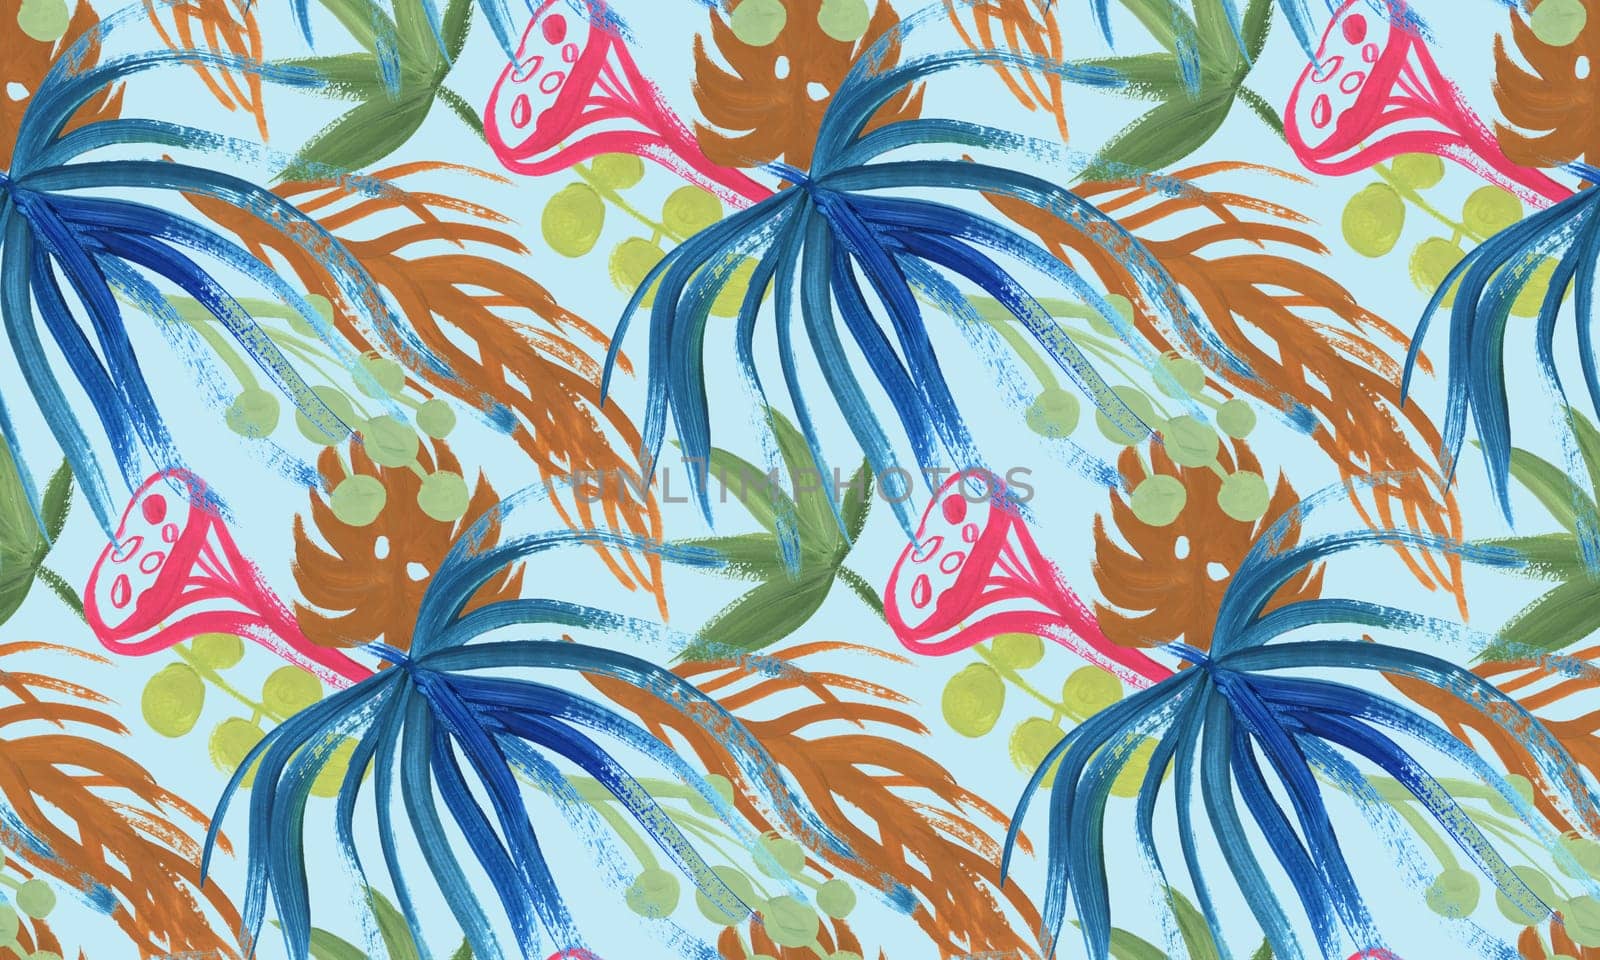 floral tropical pattern painted in gouache with dry palm leaves on a light blue background for textiles and surface design